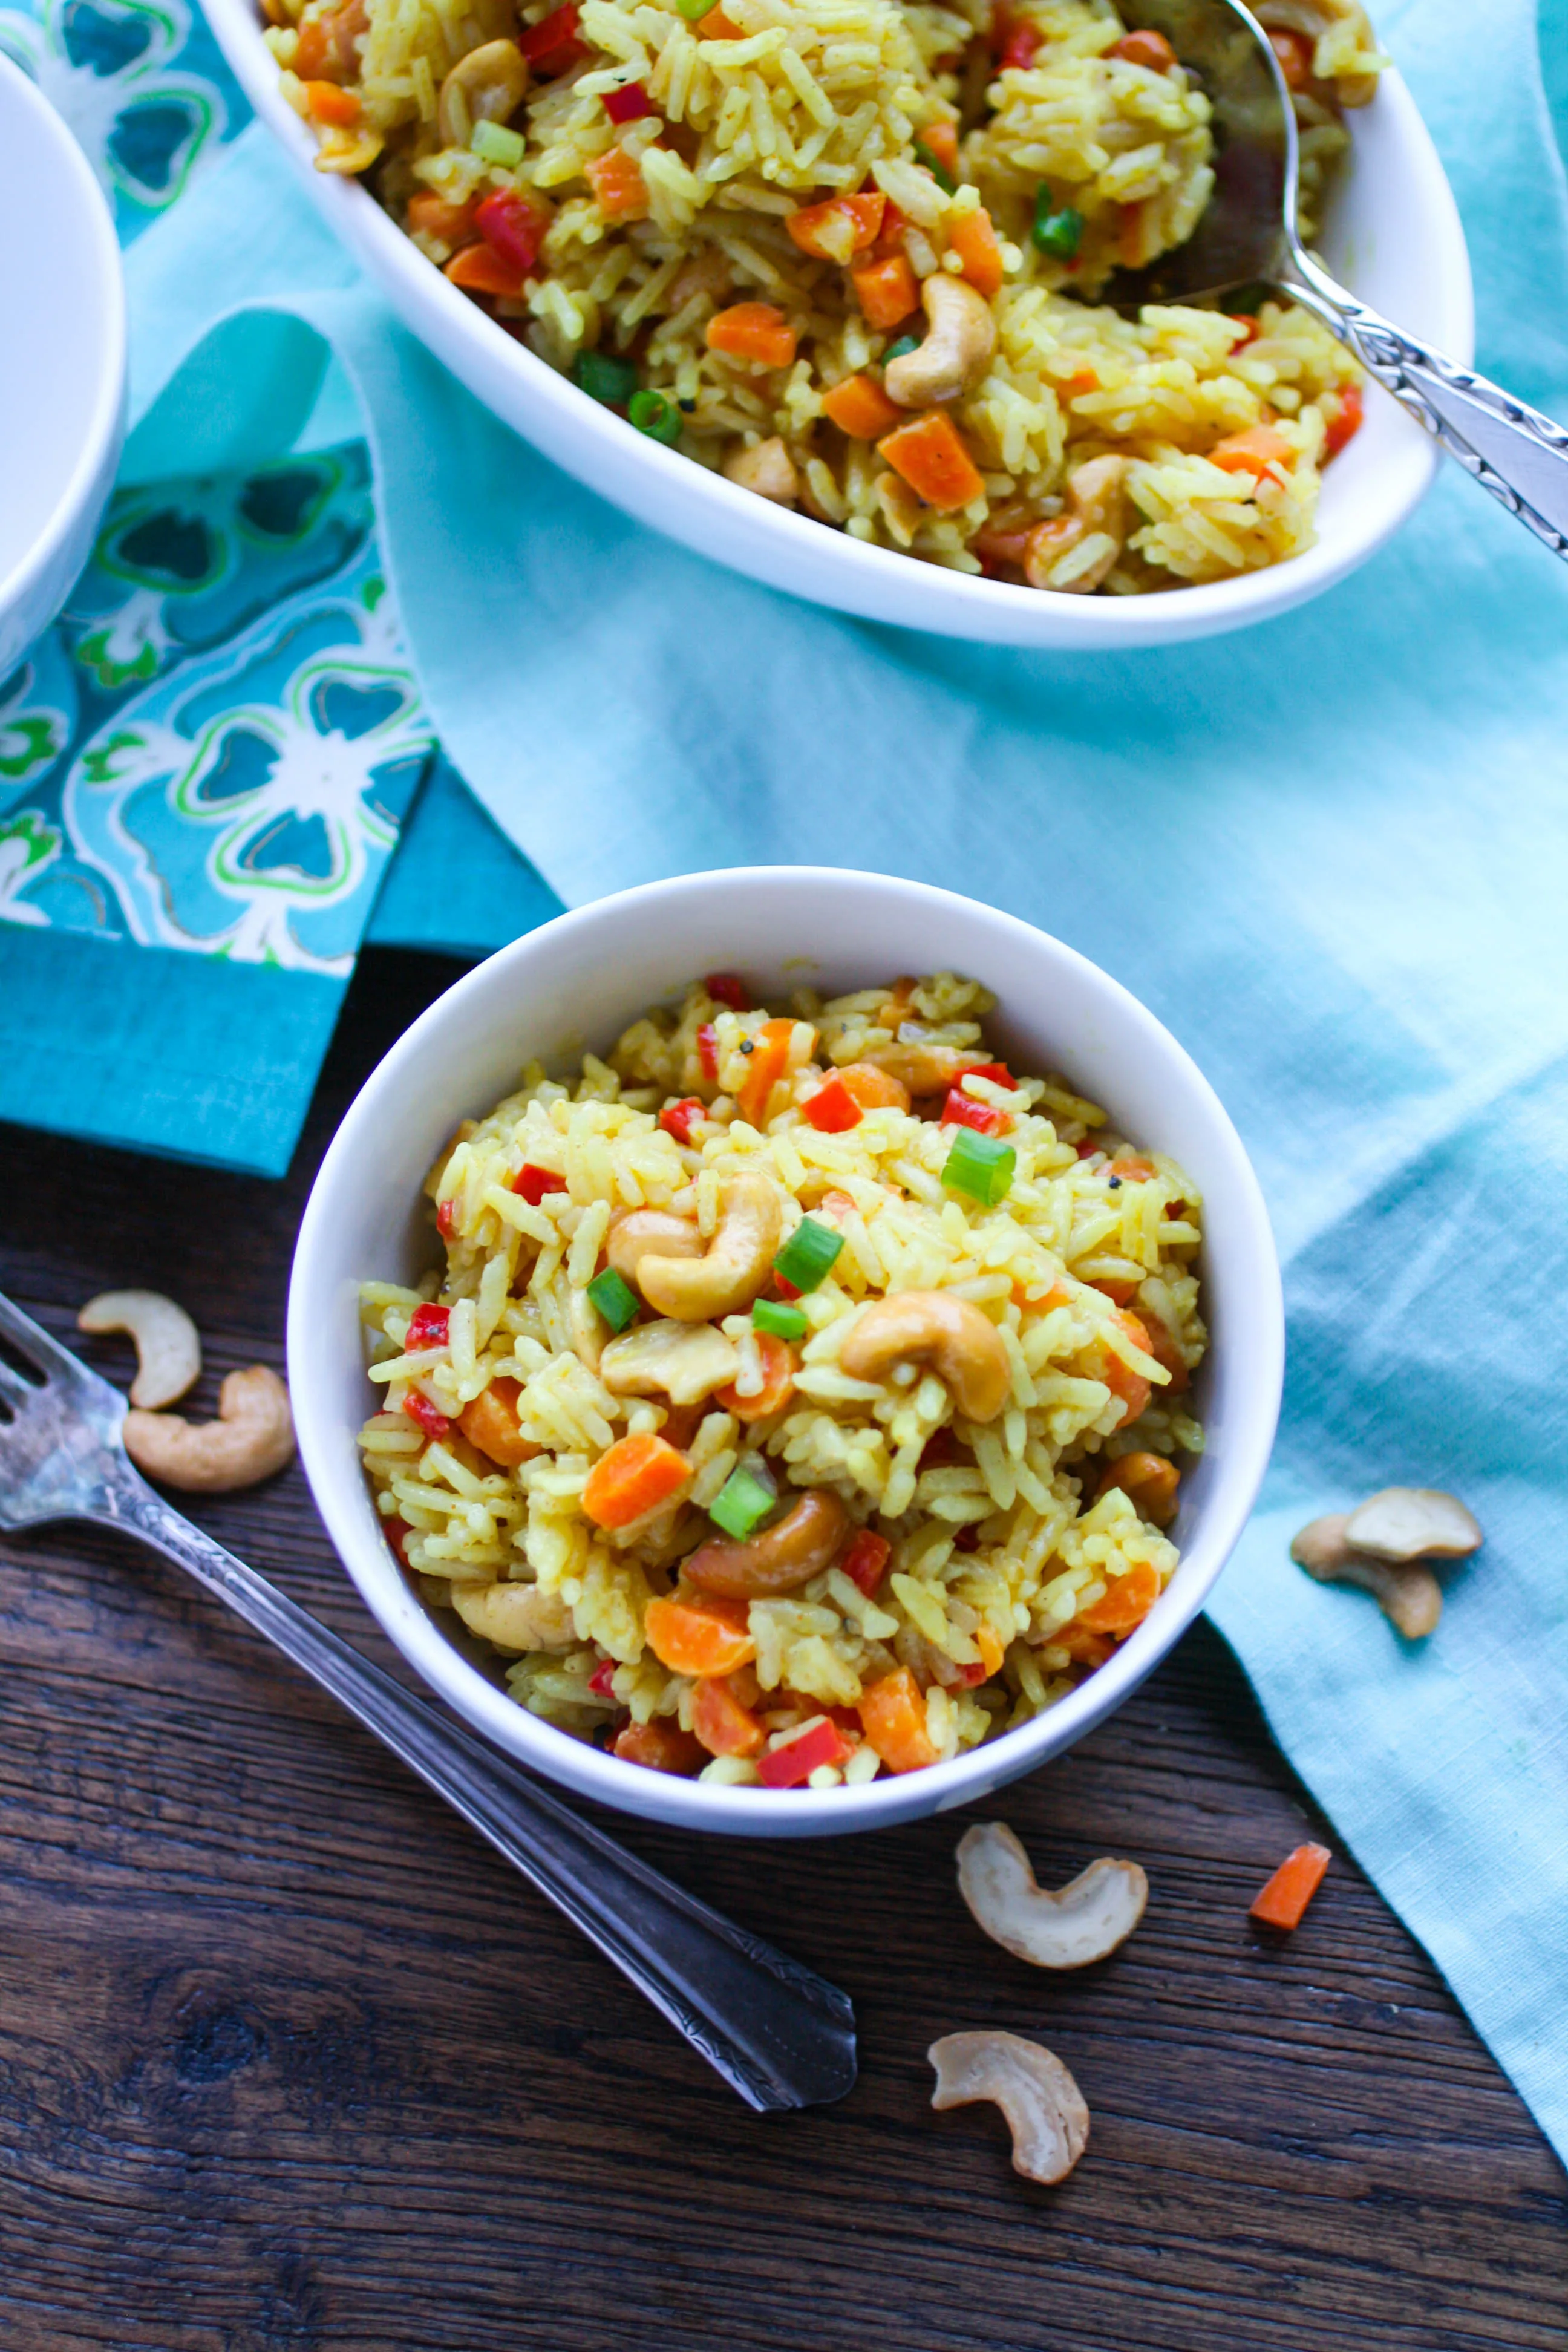 Coconut Carrot and Cashew Rice Pilaf is a colorful and flavorful side dish. This rice pilaf is so easy to make, and so delicious!